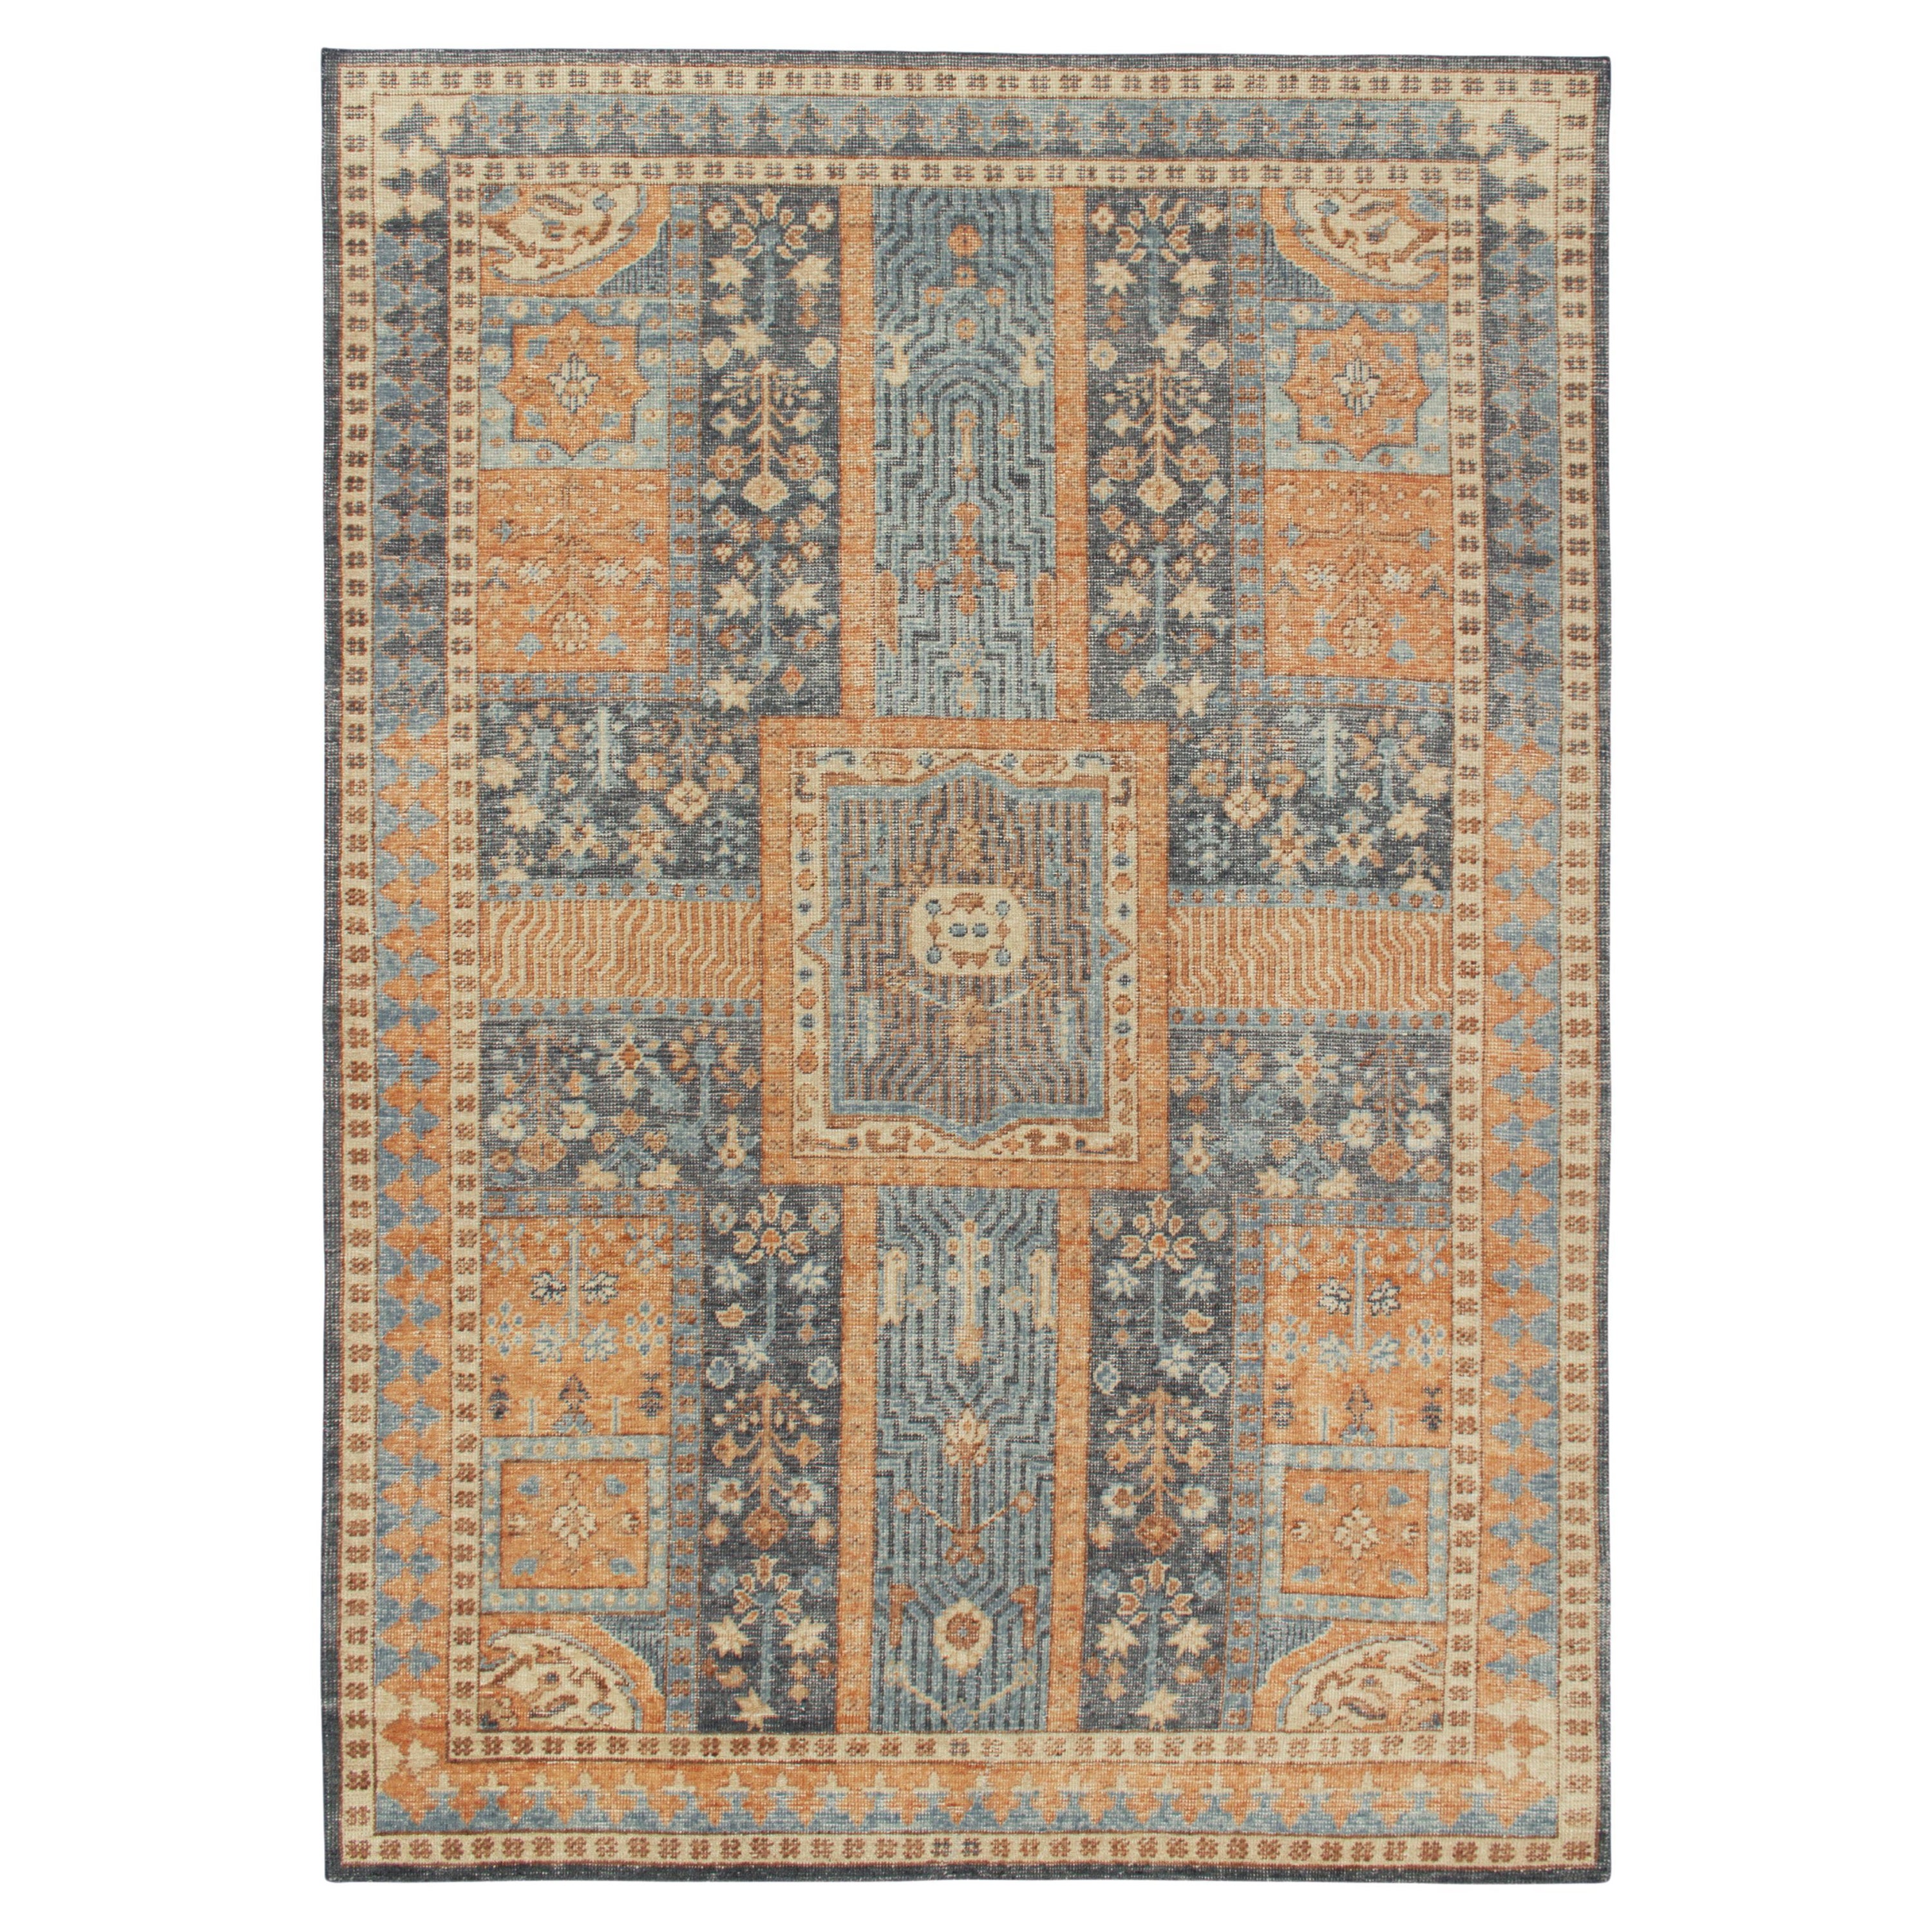 Rug & Kilim's Antique Persian Style Distressed Rug in Blue, Gold Garden Pattern For Sale